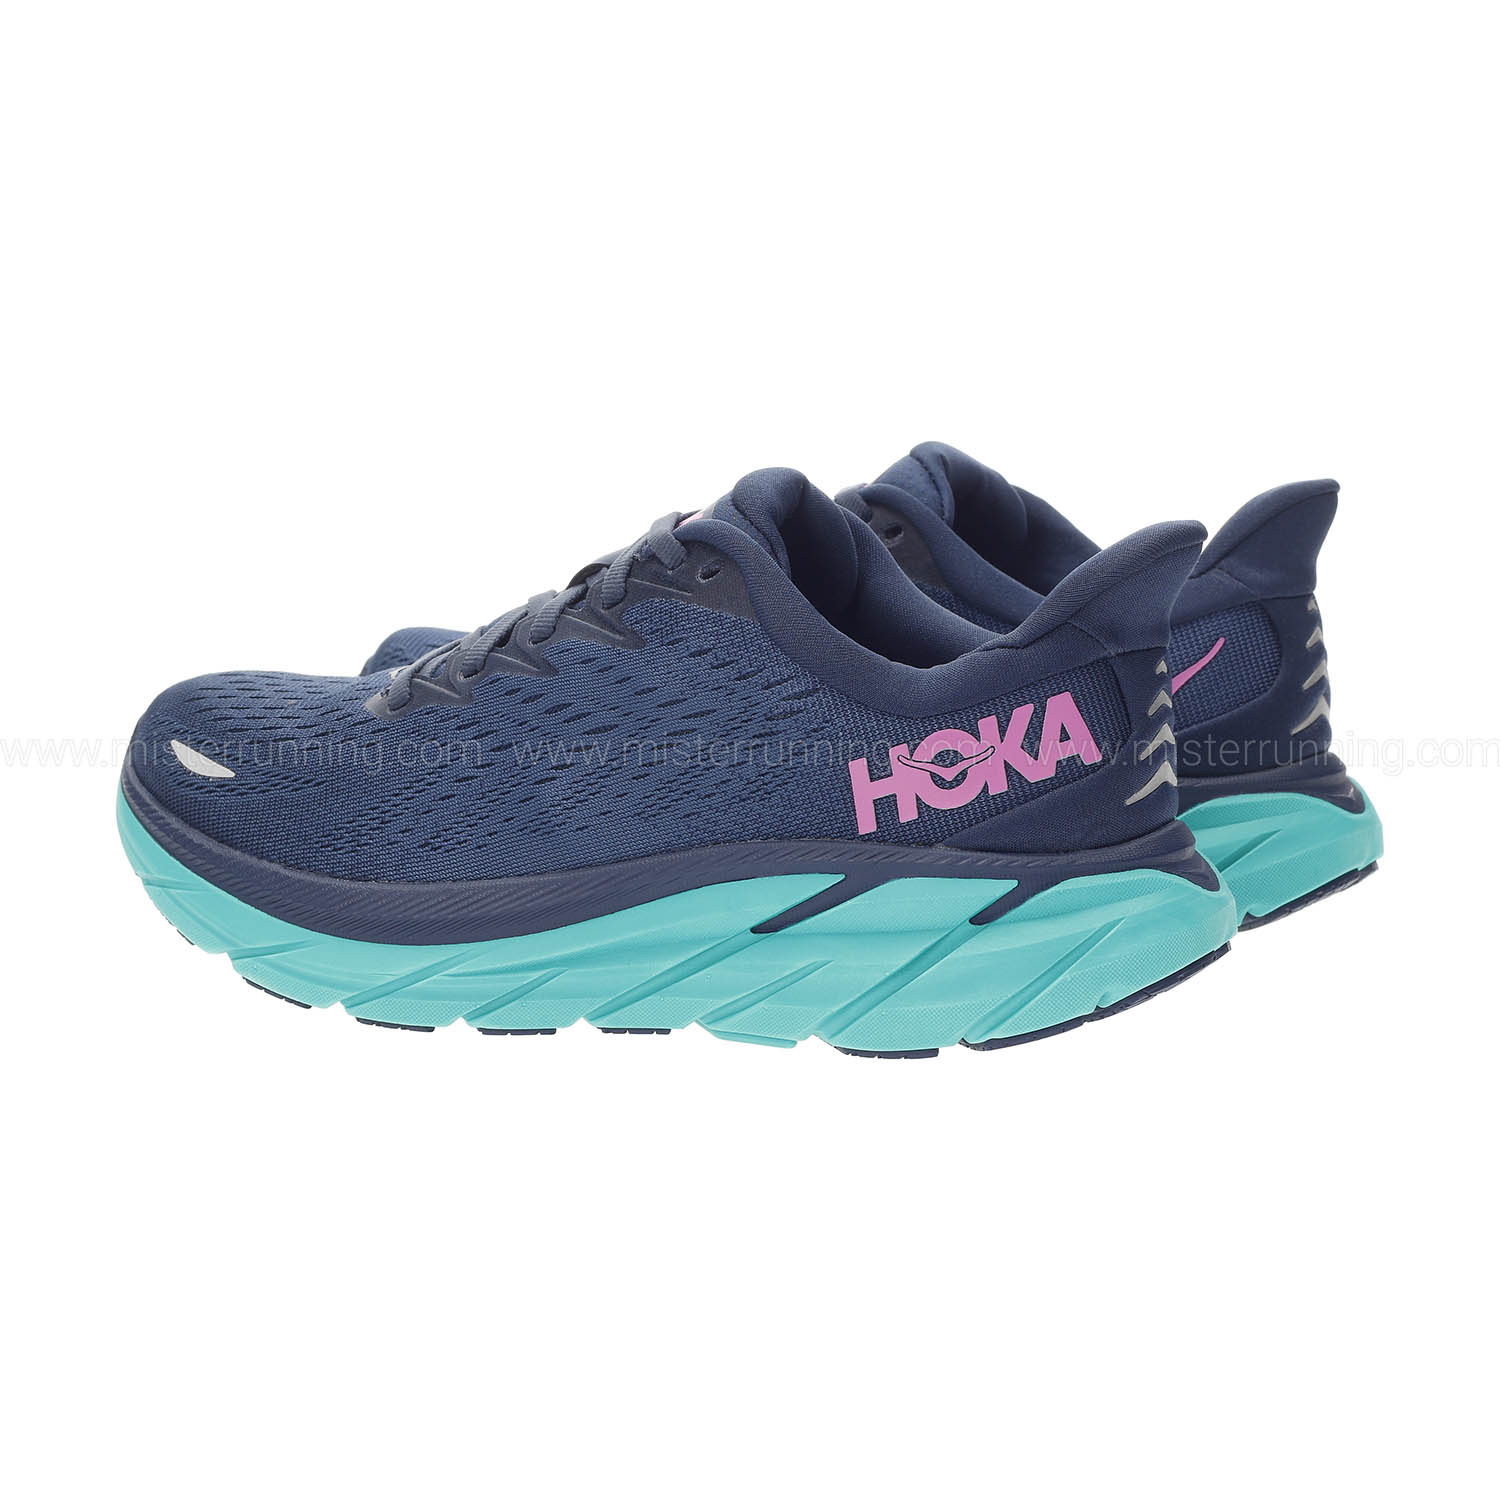 Hoka One One Clifton 8 Women's Running Shoes - Outer Space